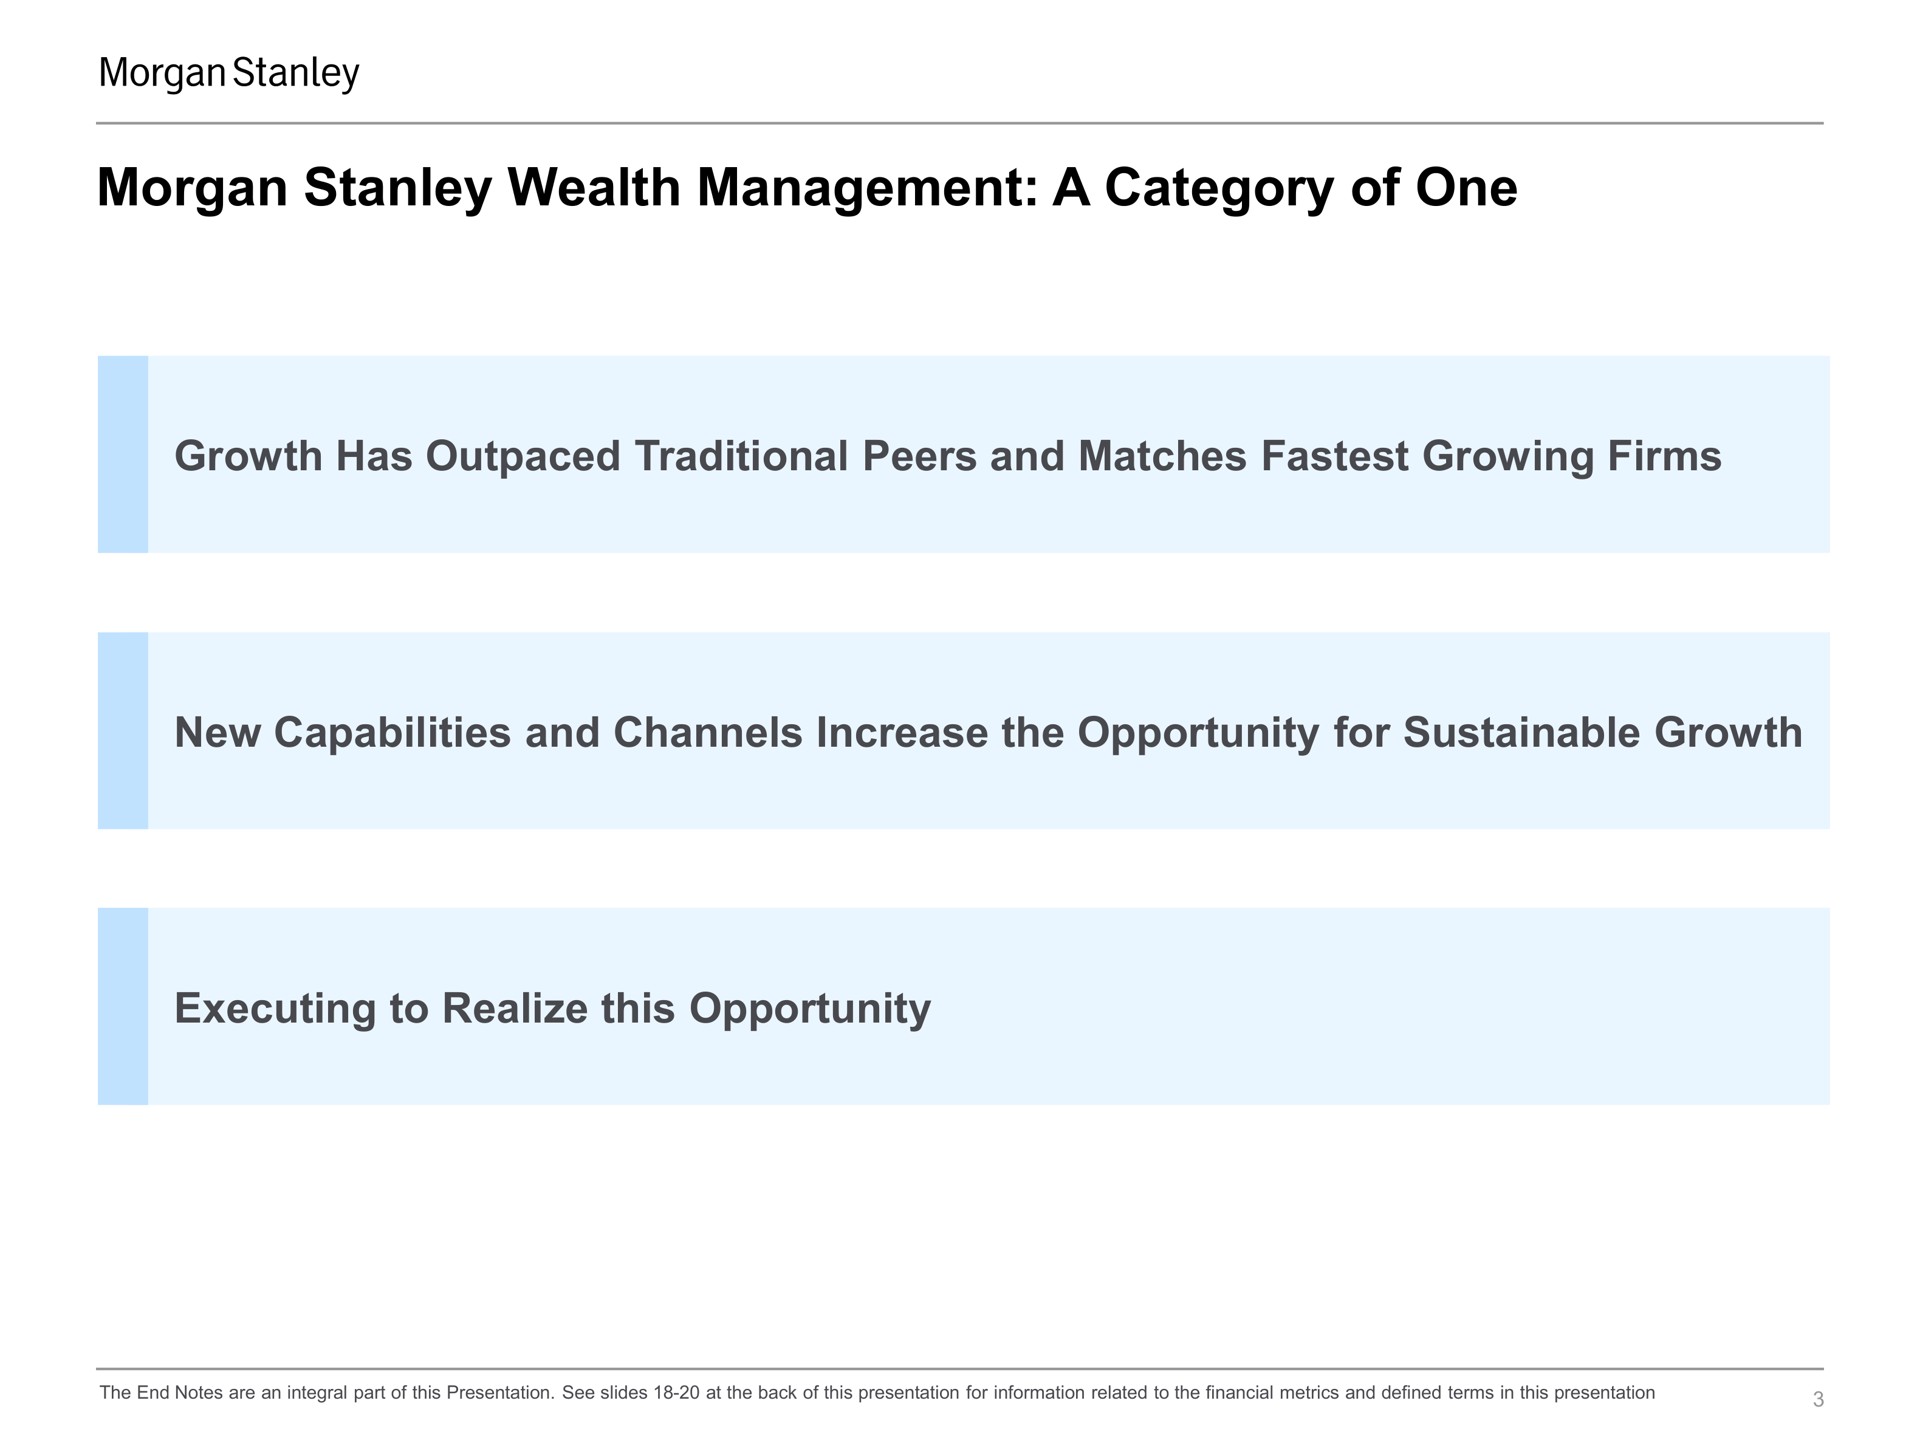 morgan wealth management a category of one growth has outpaced traditional peers and matches growing firms new capabilities and channels increase the opportunity for sustainable growth executing to realize this opportunity | Morgan Stanley